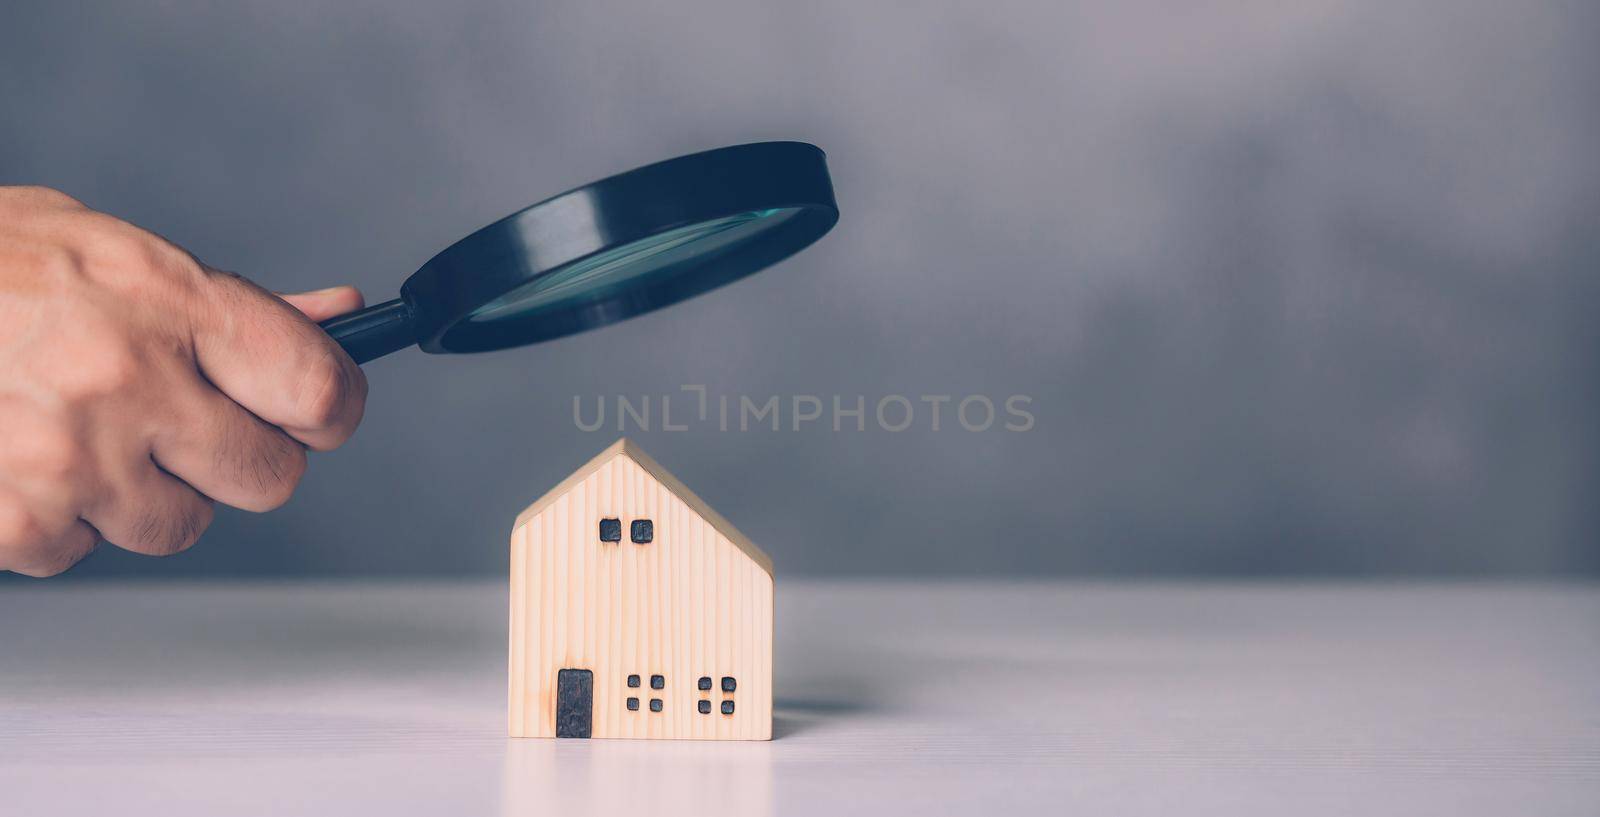 Hand of businessman hold magnifying glass looking house for examining and analyzing quality, inspection and check home, purchase and search residential and investment, business and property concept.